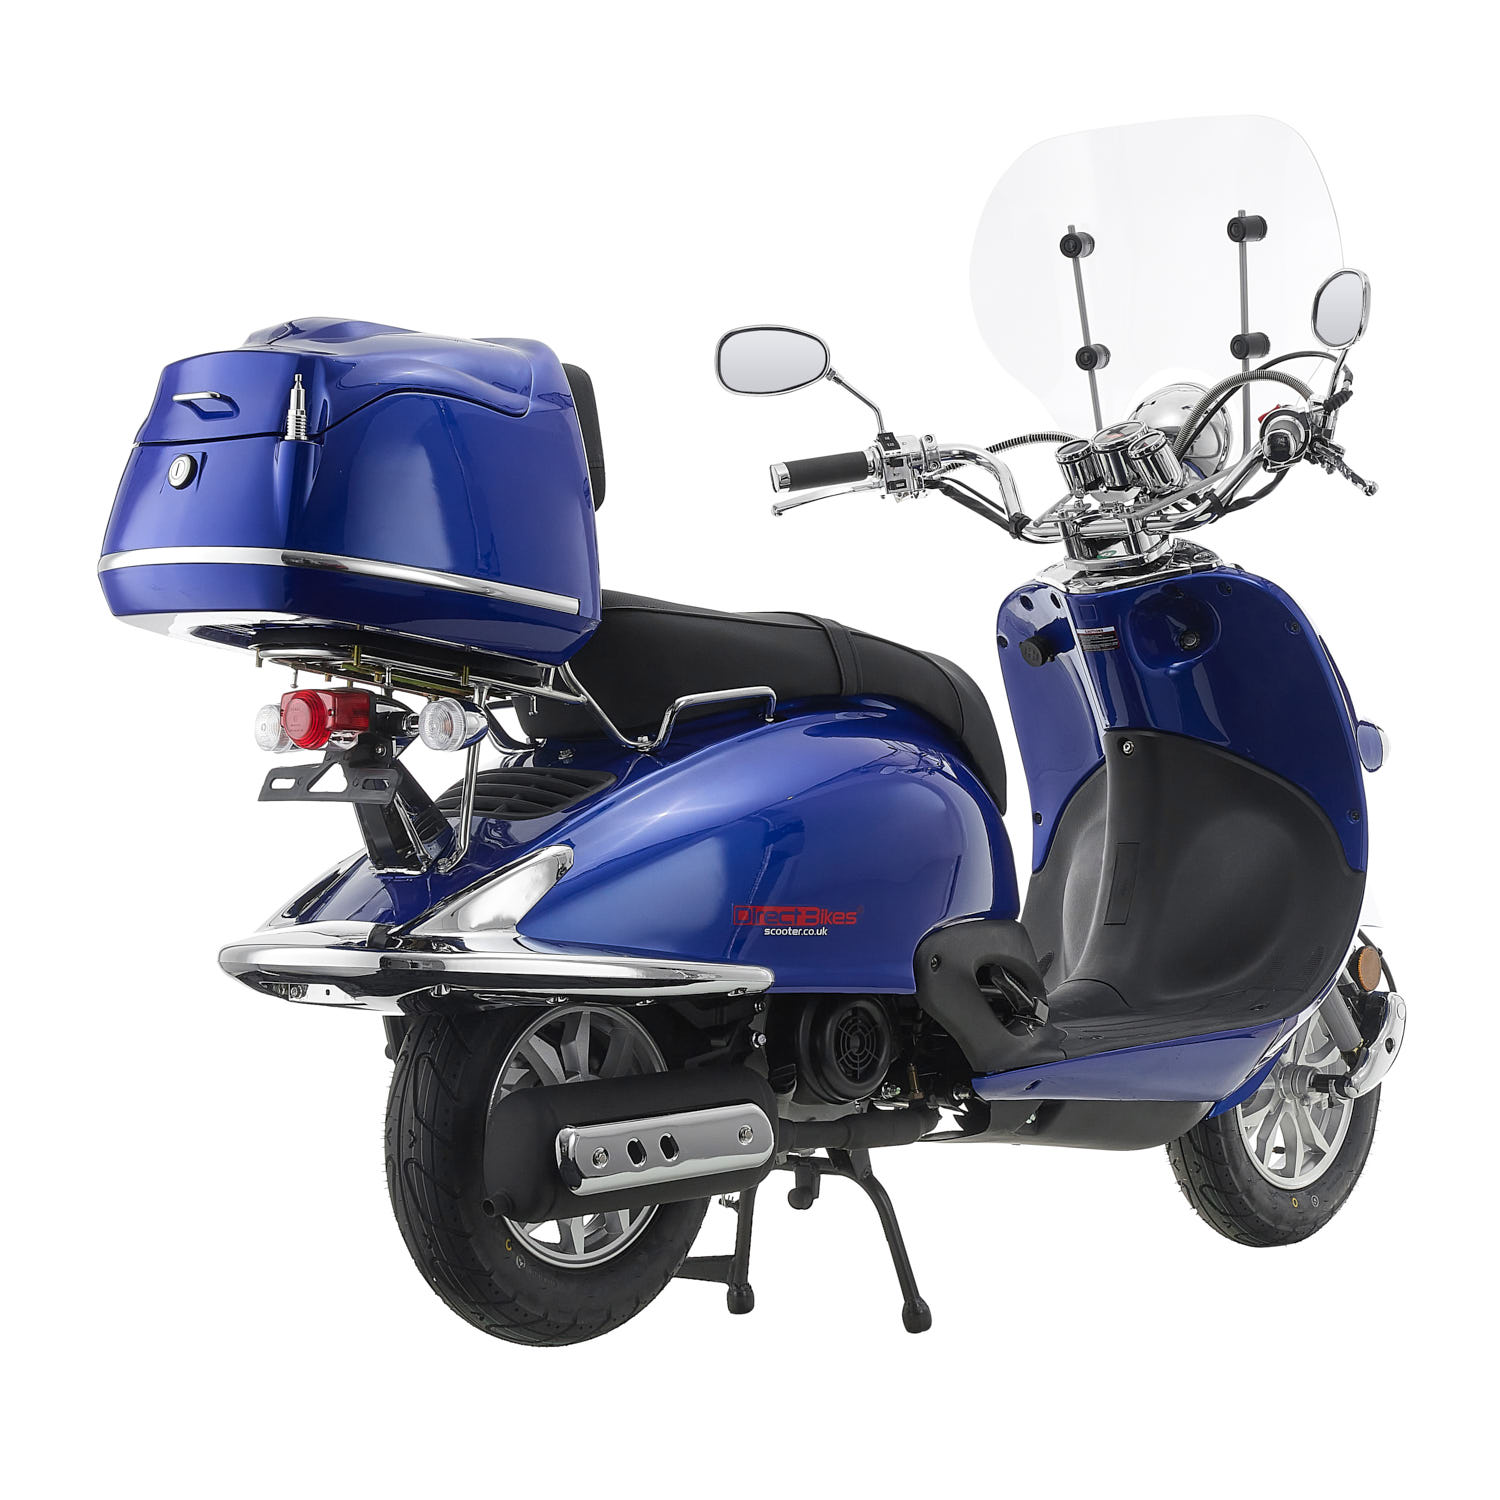 Petrol Scooter 125cc Tommy | Buy Direct Bikes